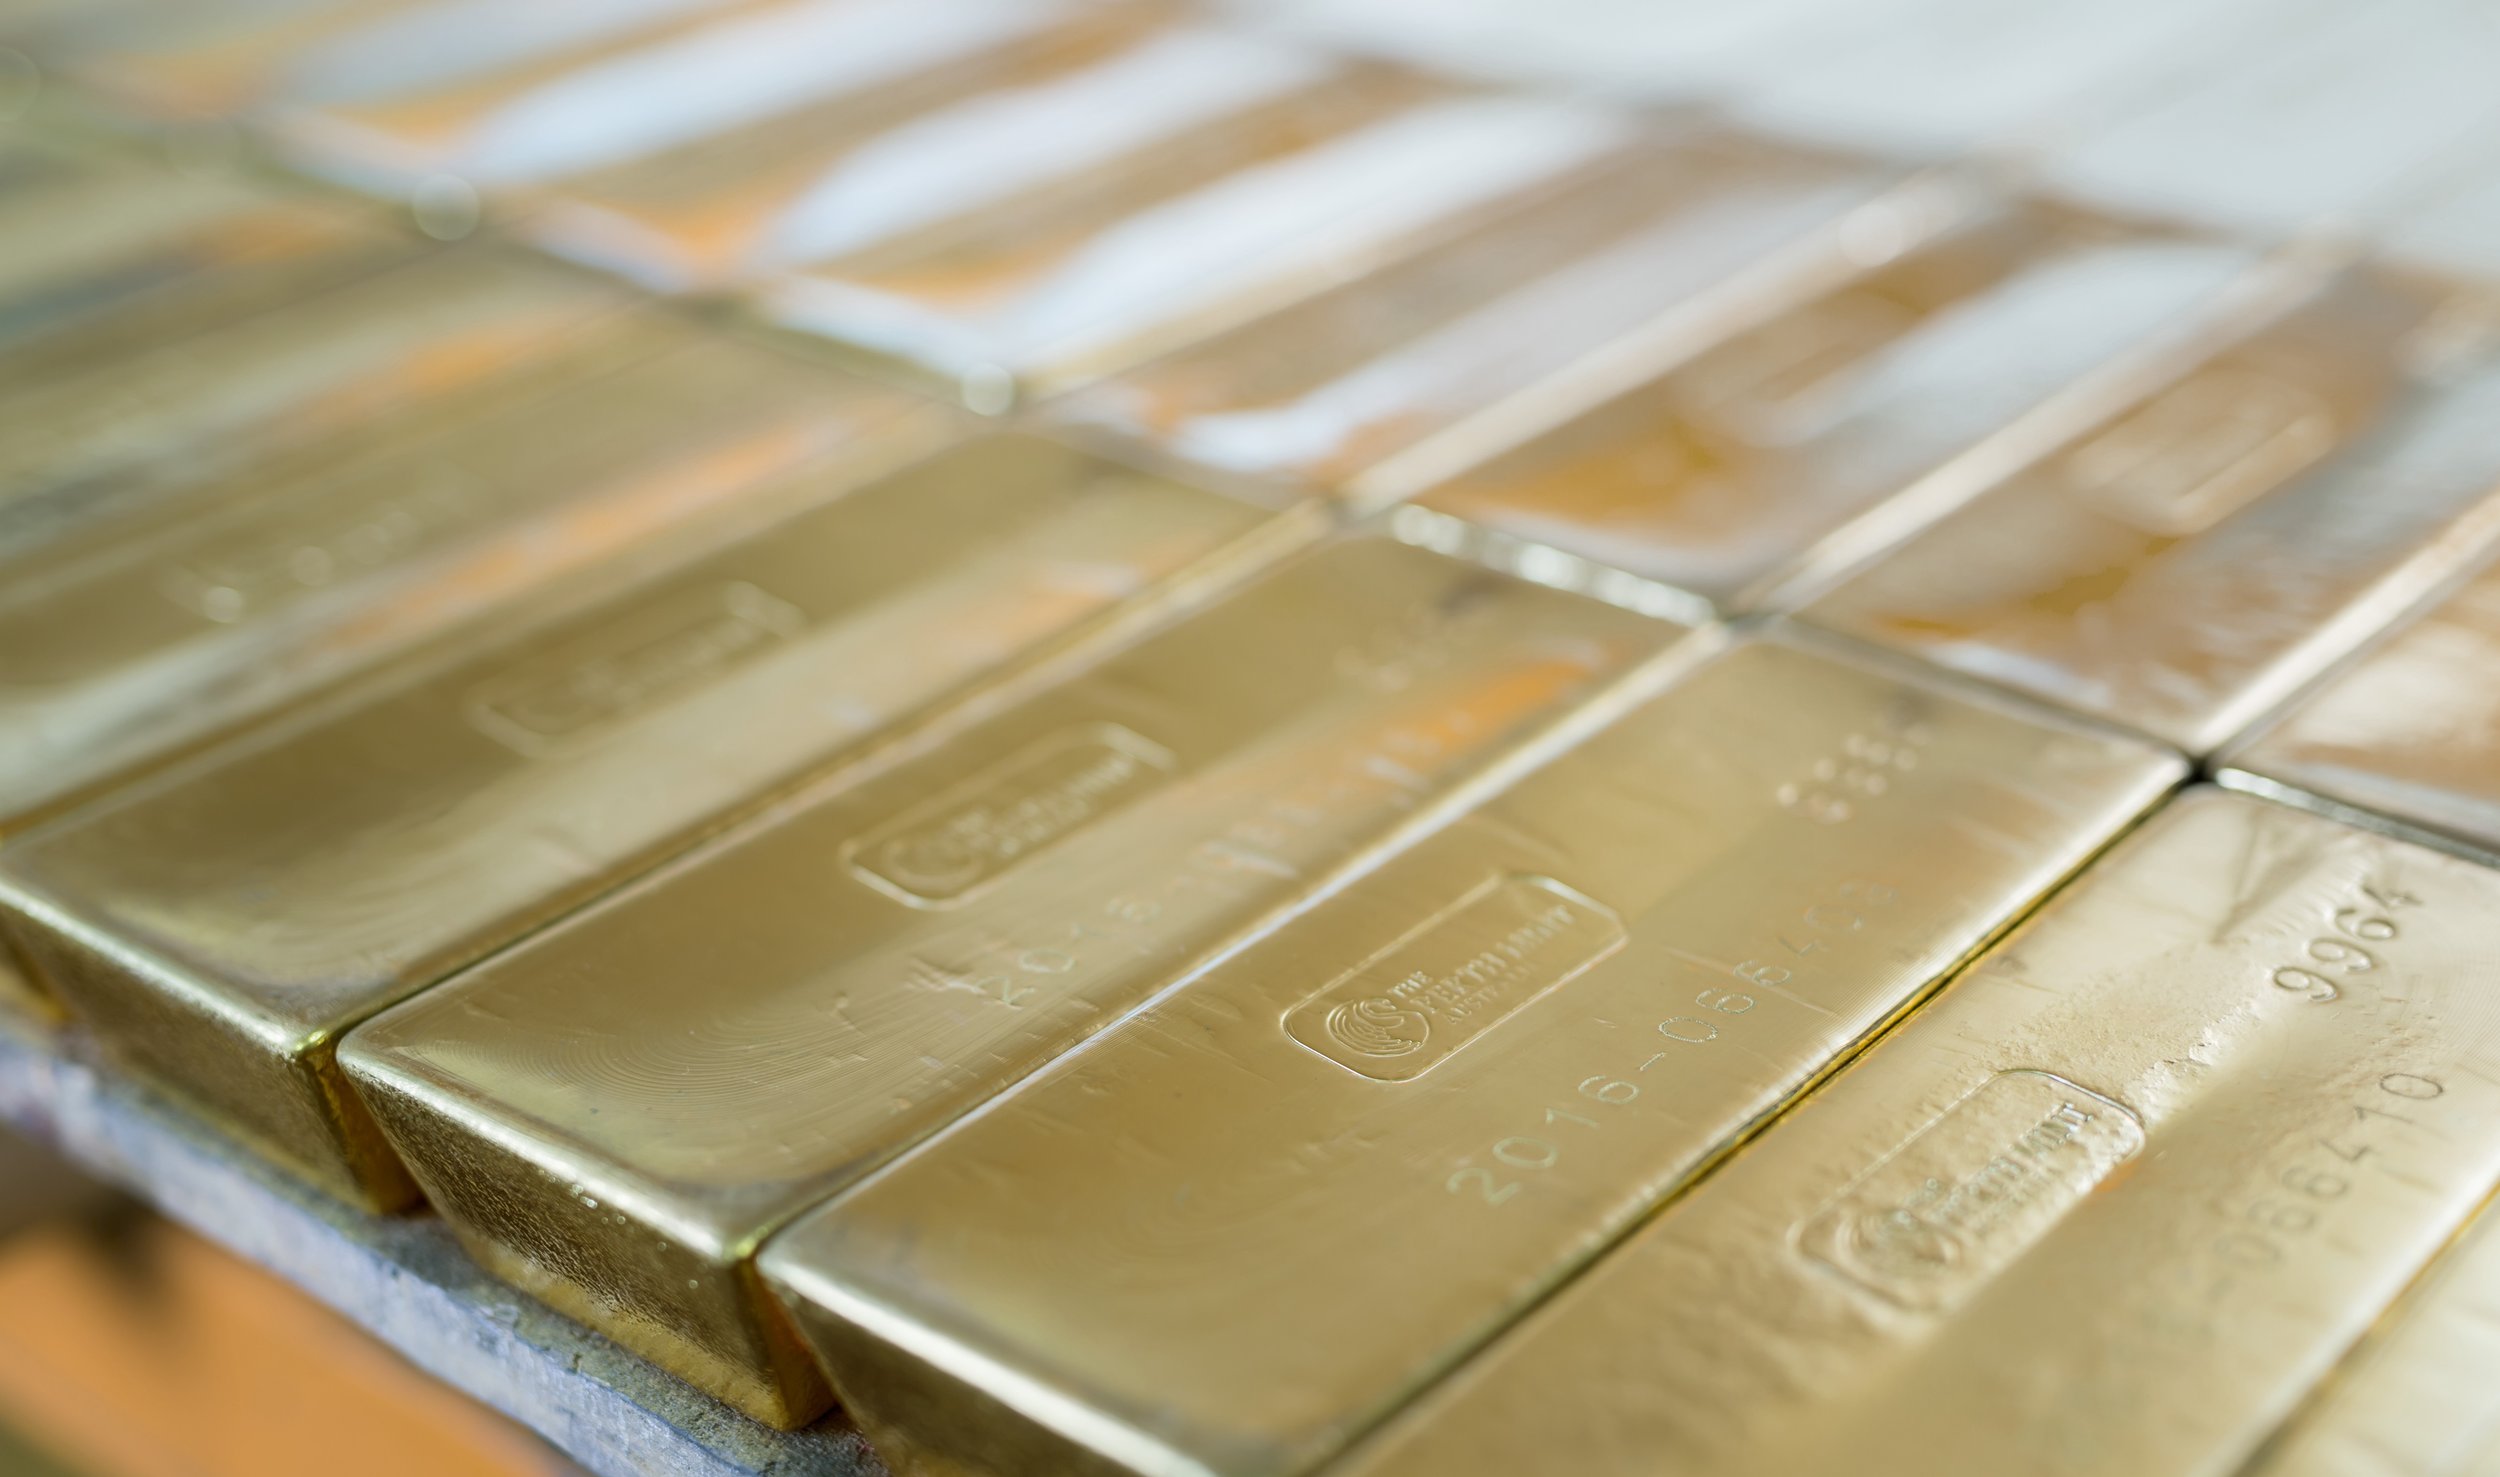 Buying Gold: What to buy - bars vs coins